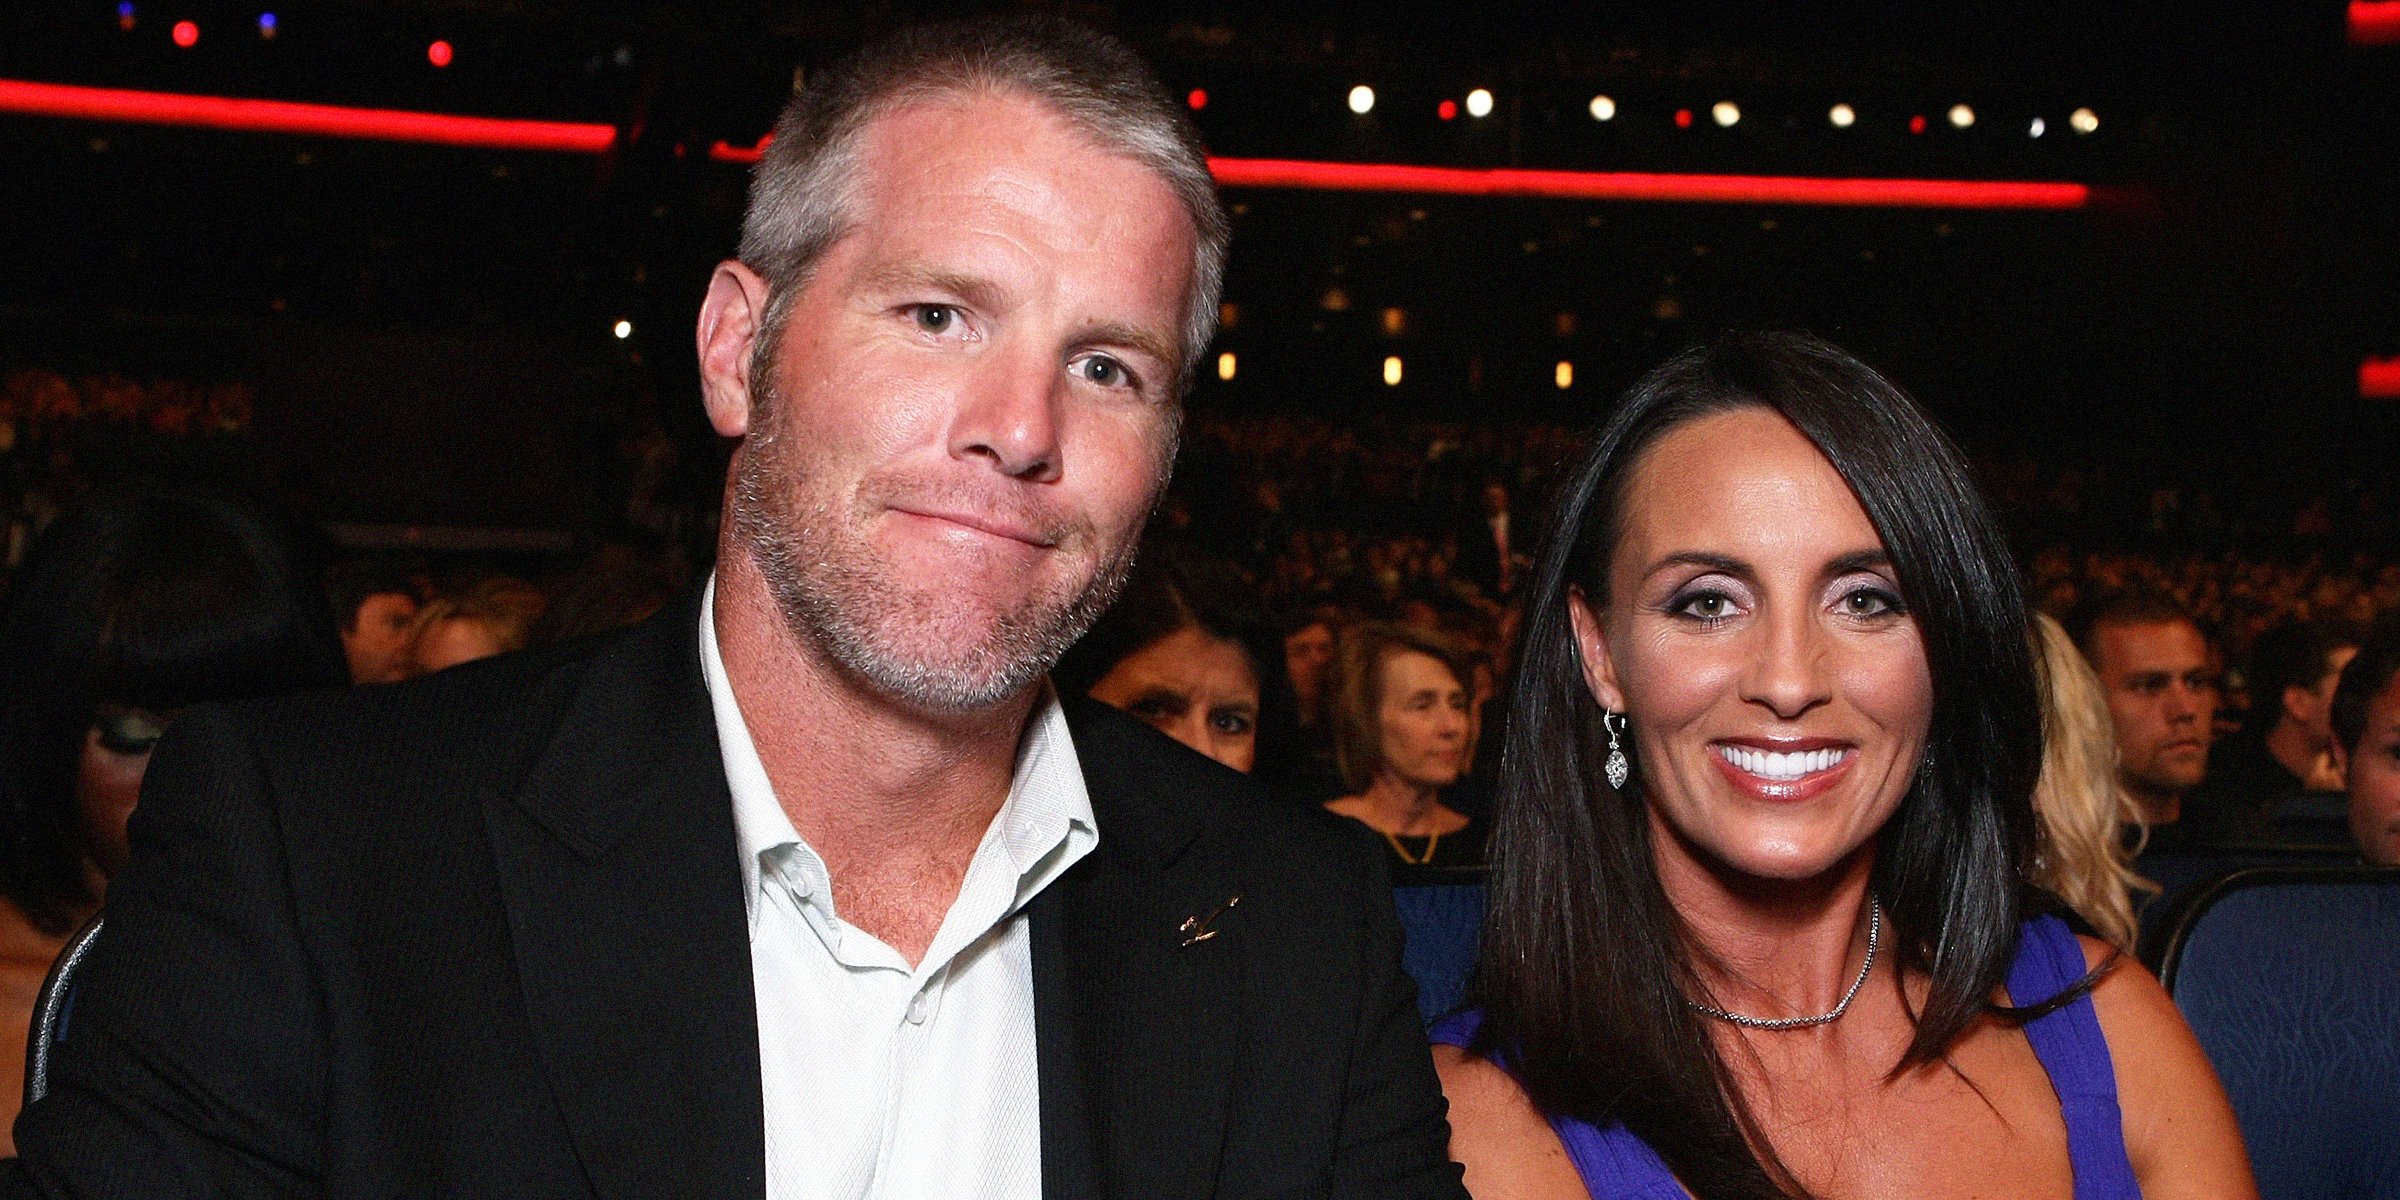 Brett and Deanna Favre. | Source: Getty Images